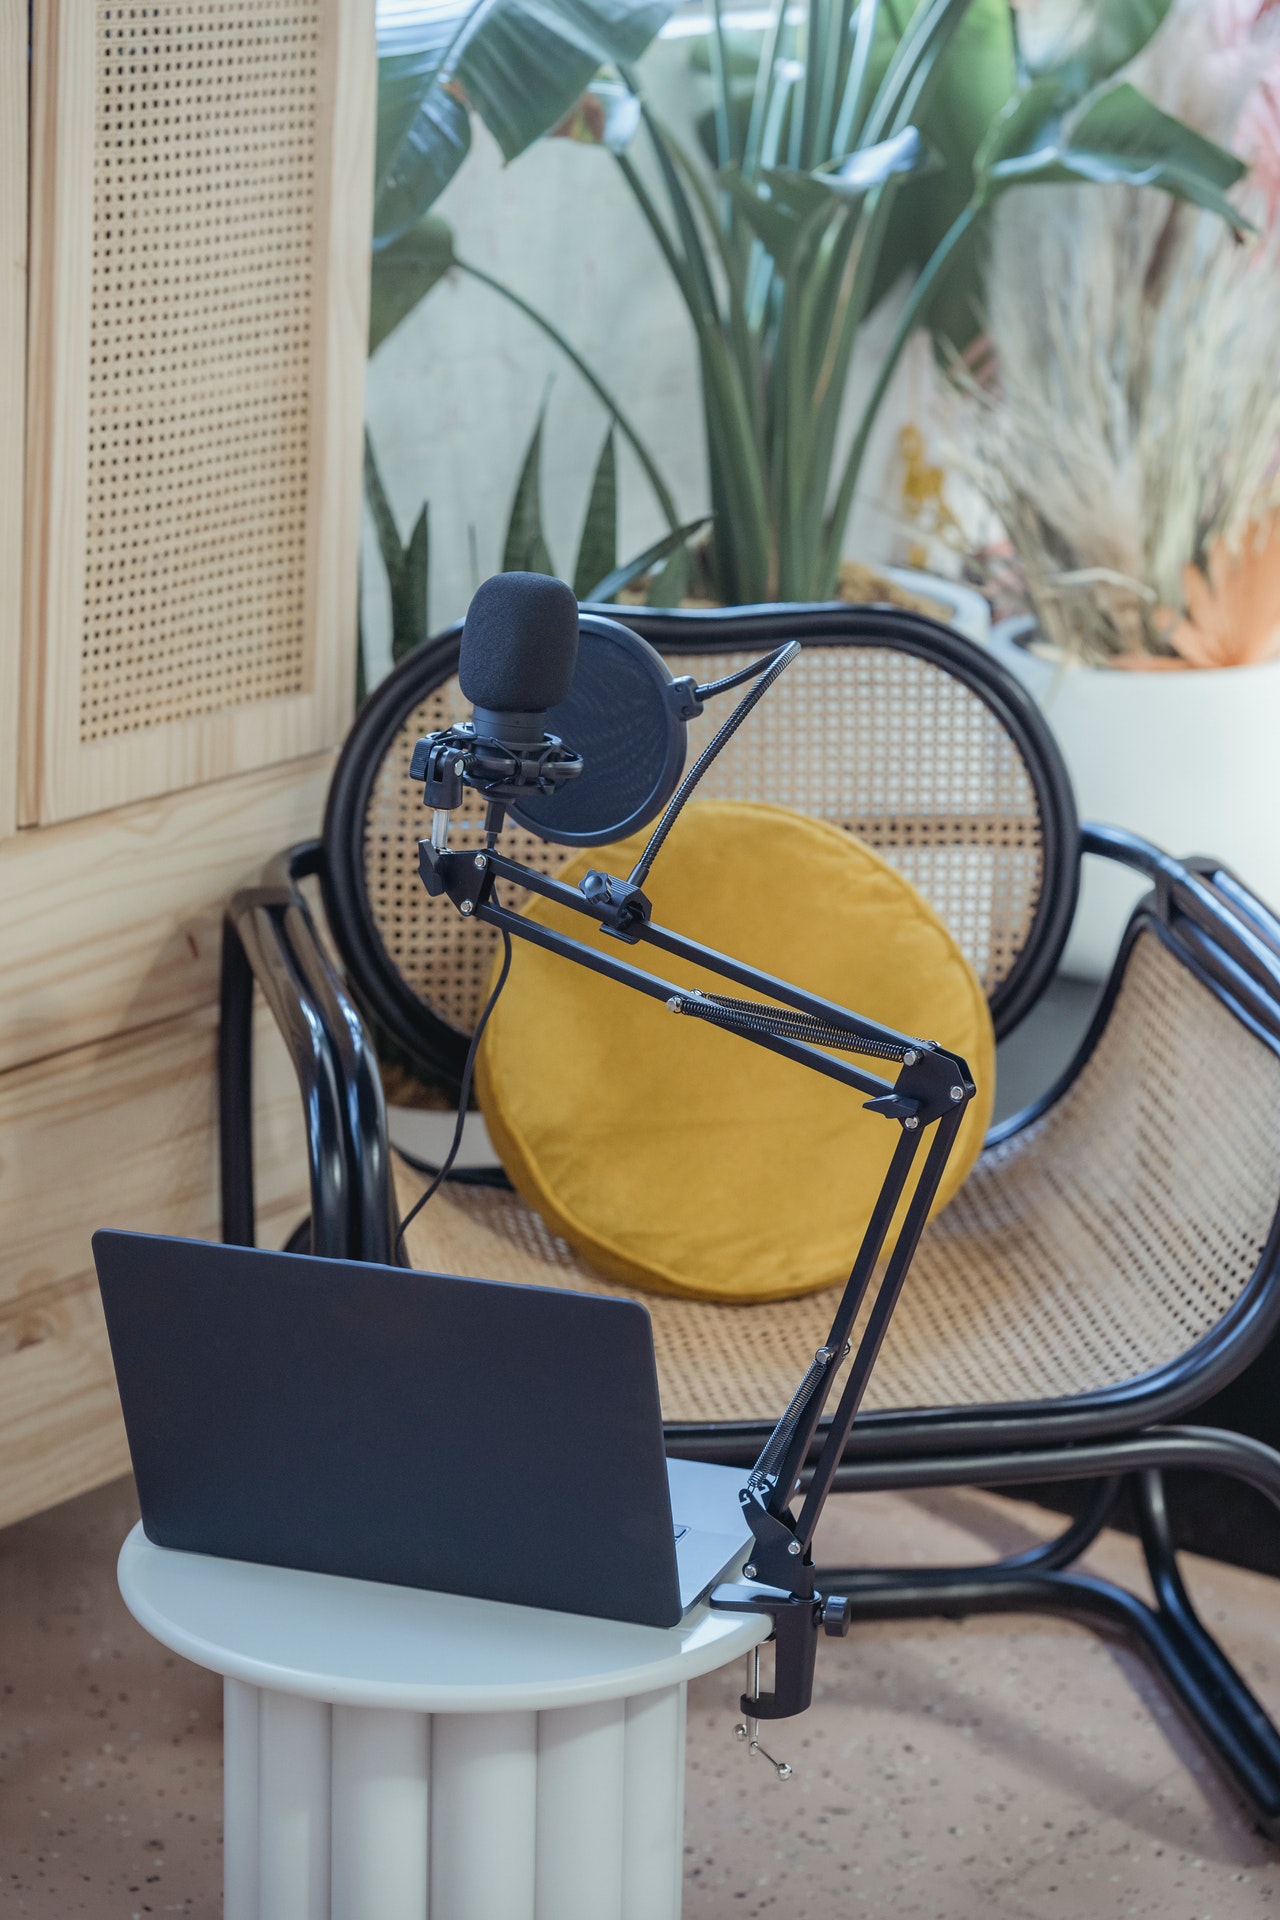 How to Get Featured on Podcasts